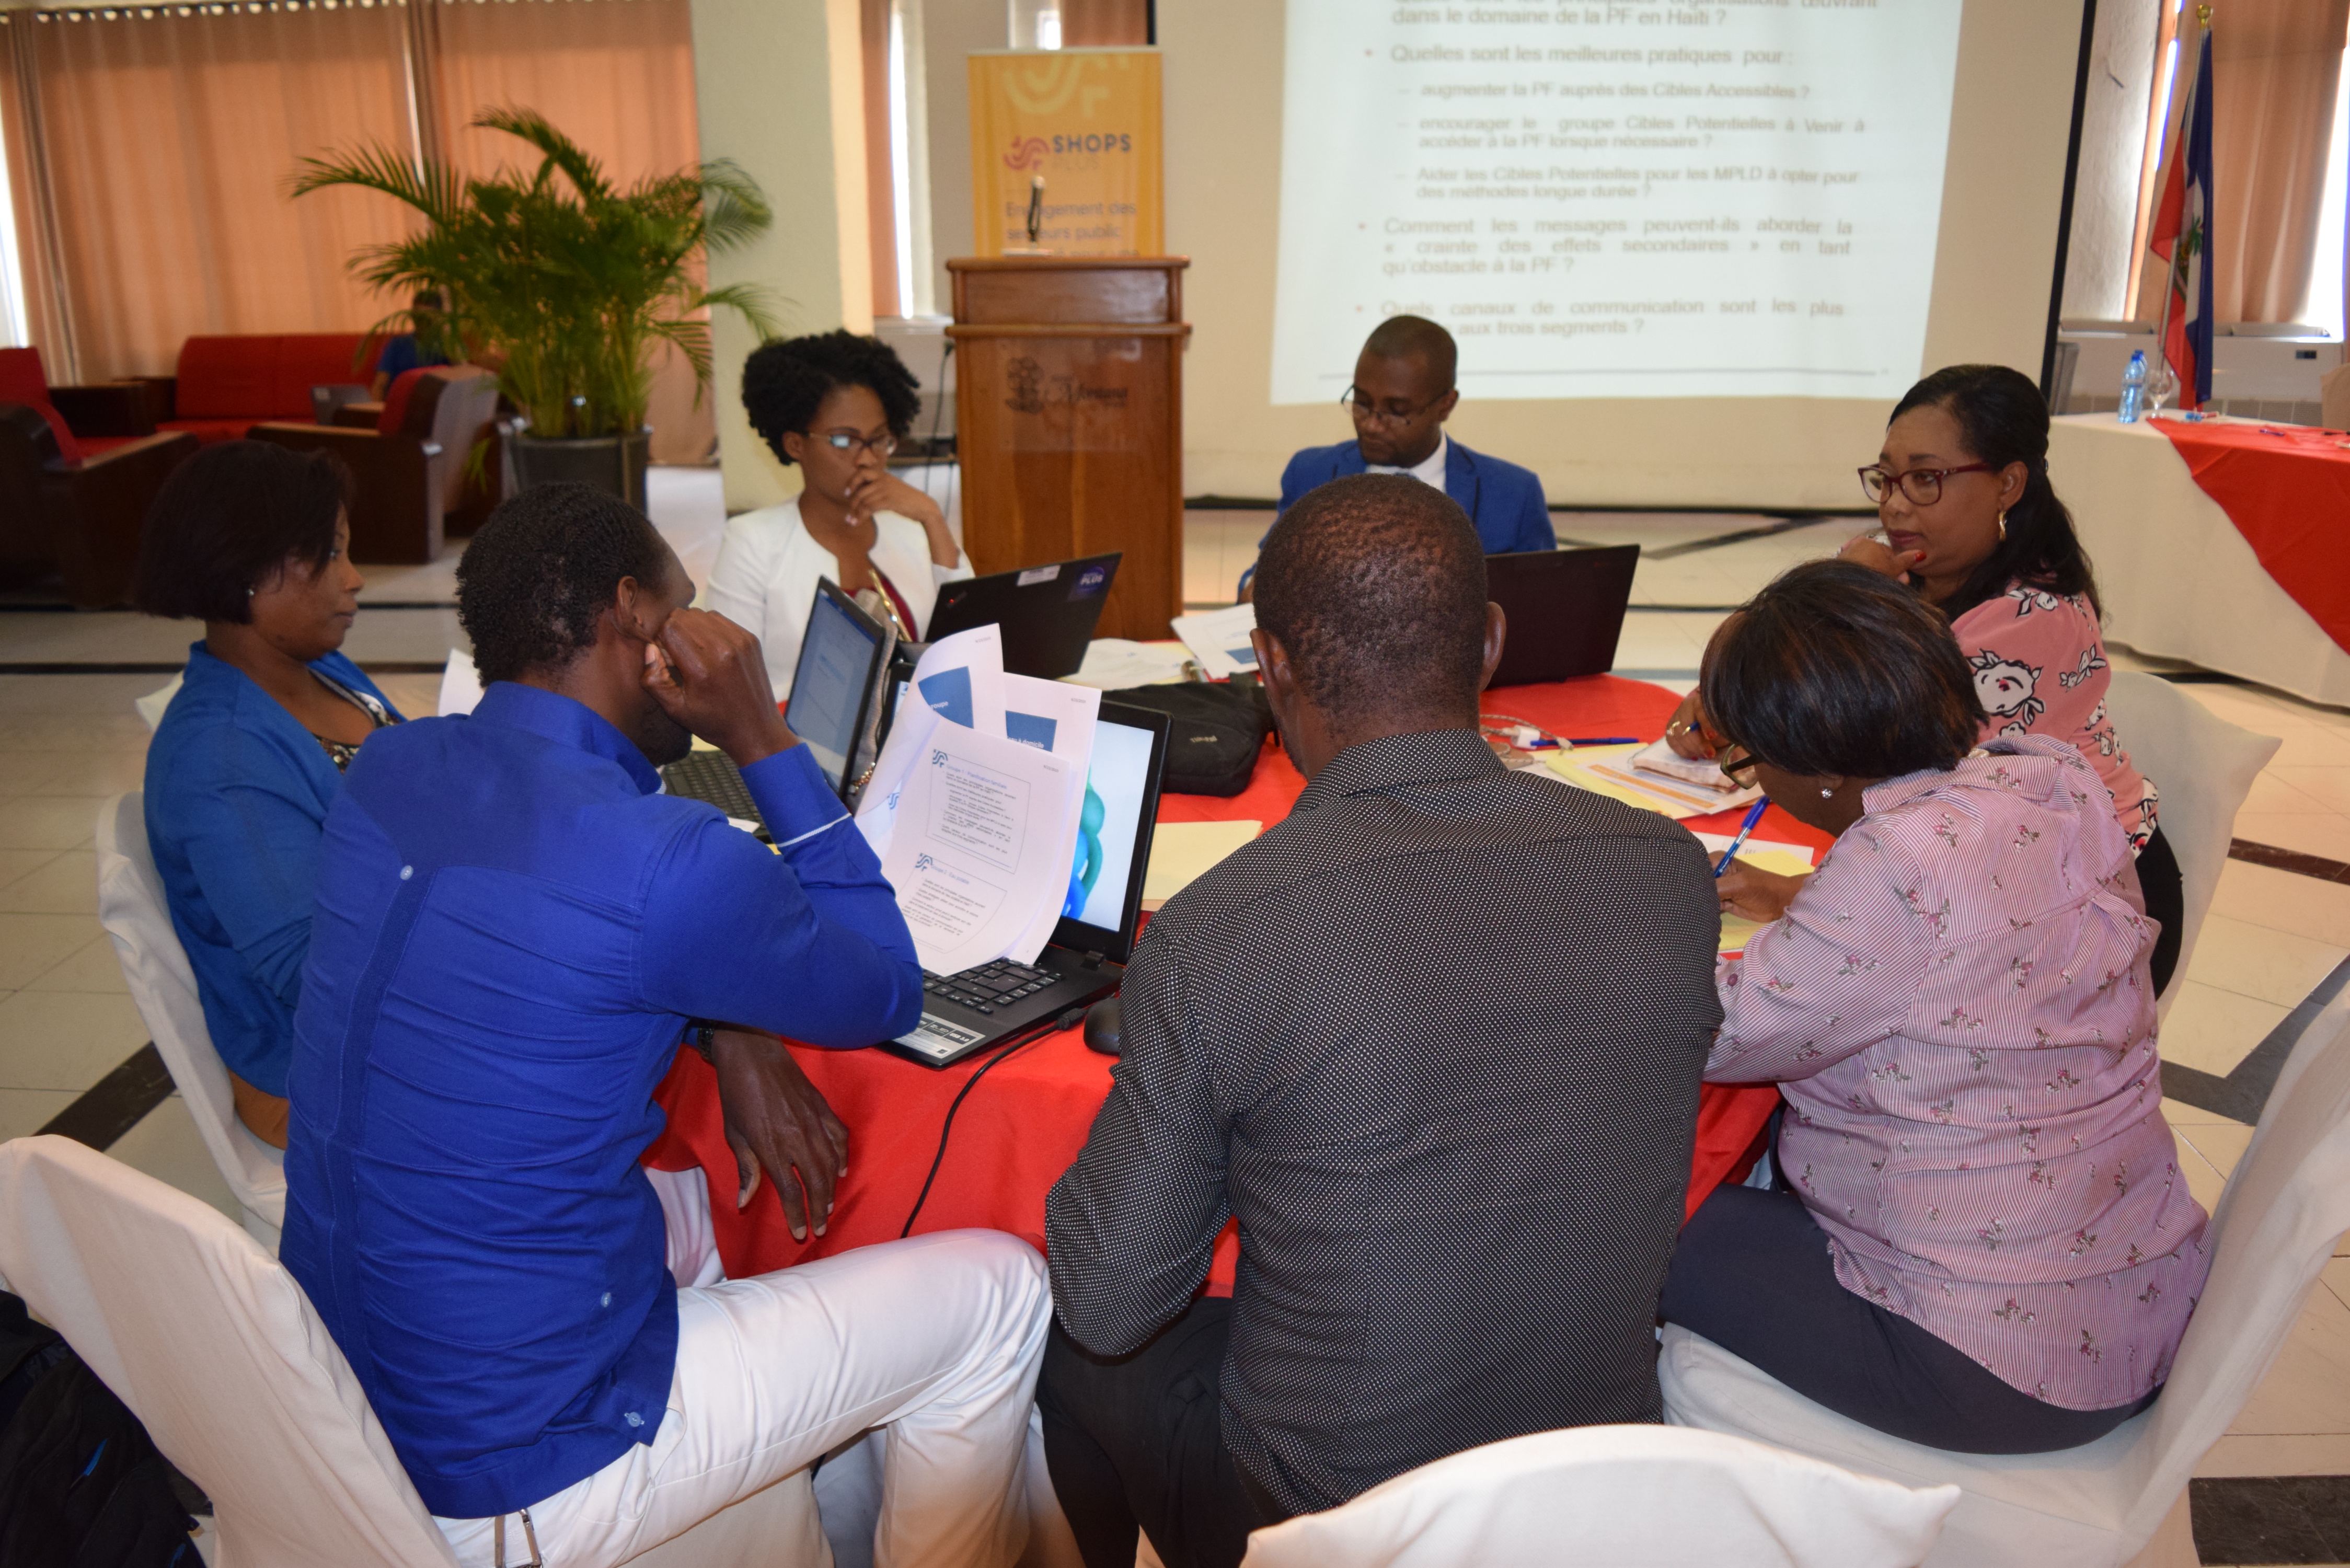 A group of participants sitting around a table during a breakout session during the workshop